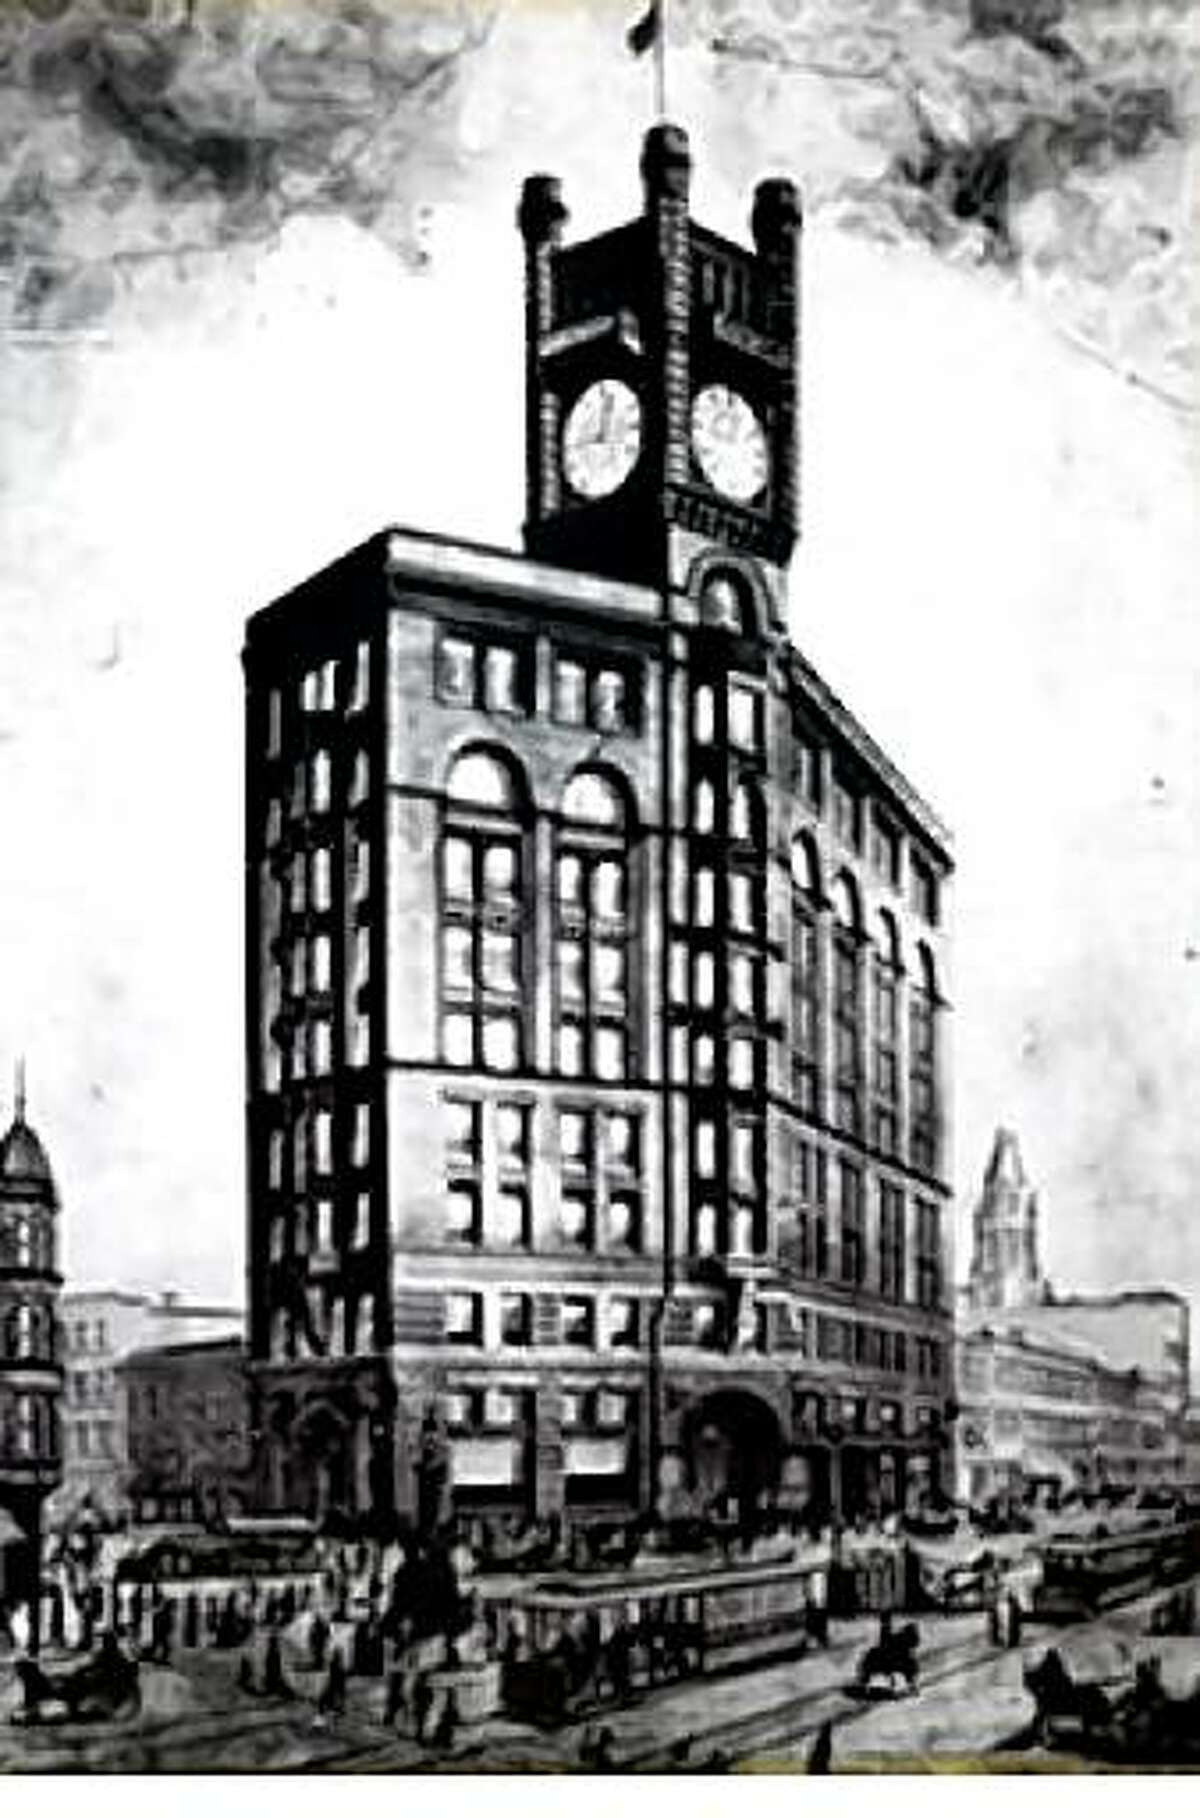 Original 1890's Chronicle building located at 690 Market St. by famous Chicago architectural firm Burnham & Root